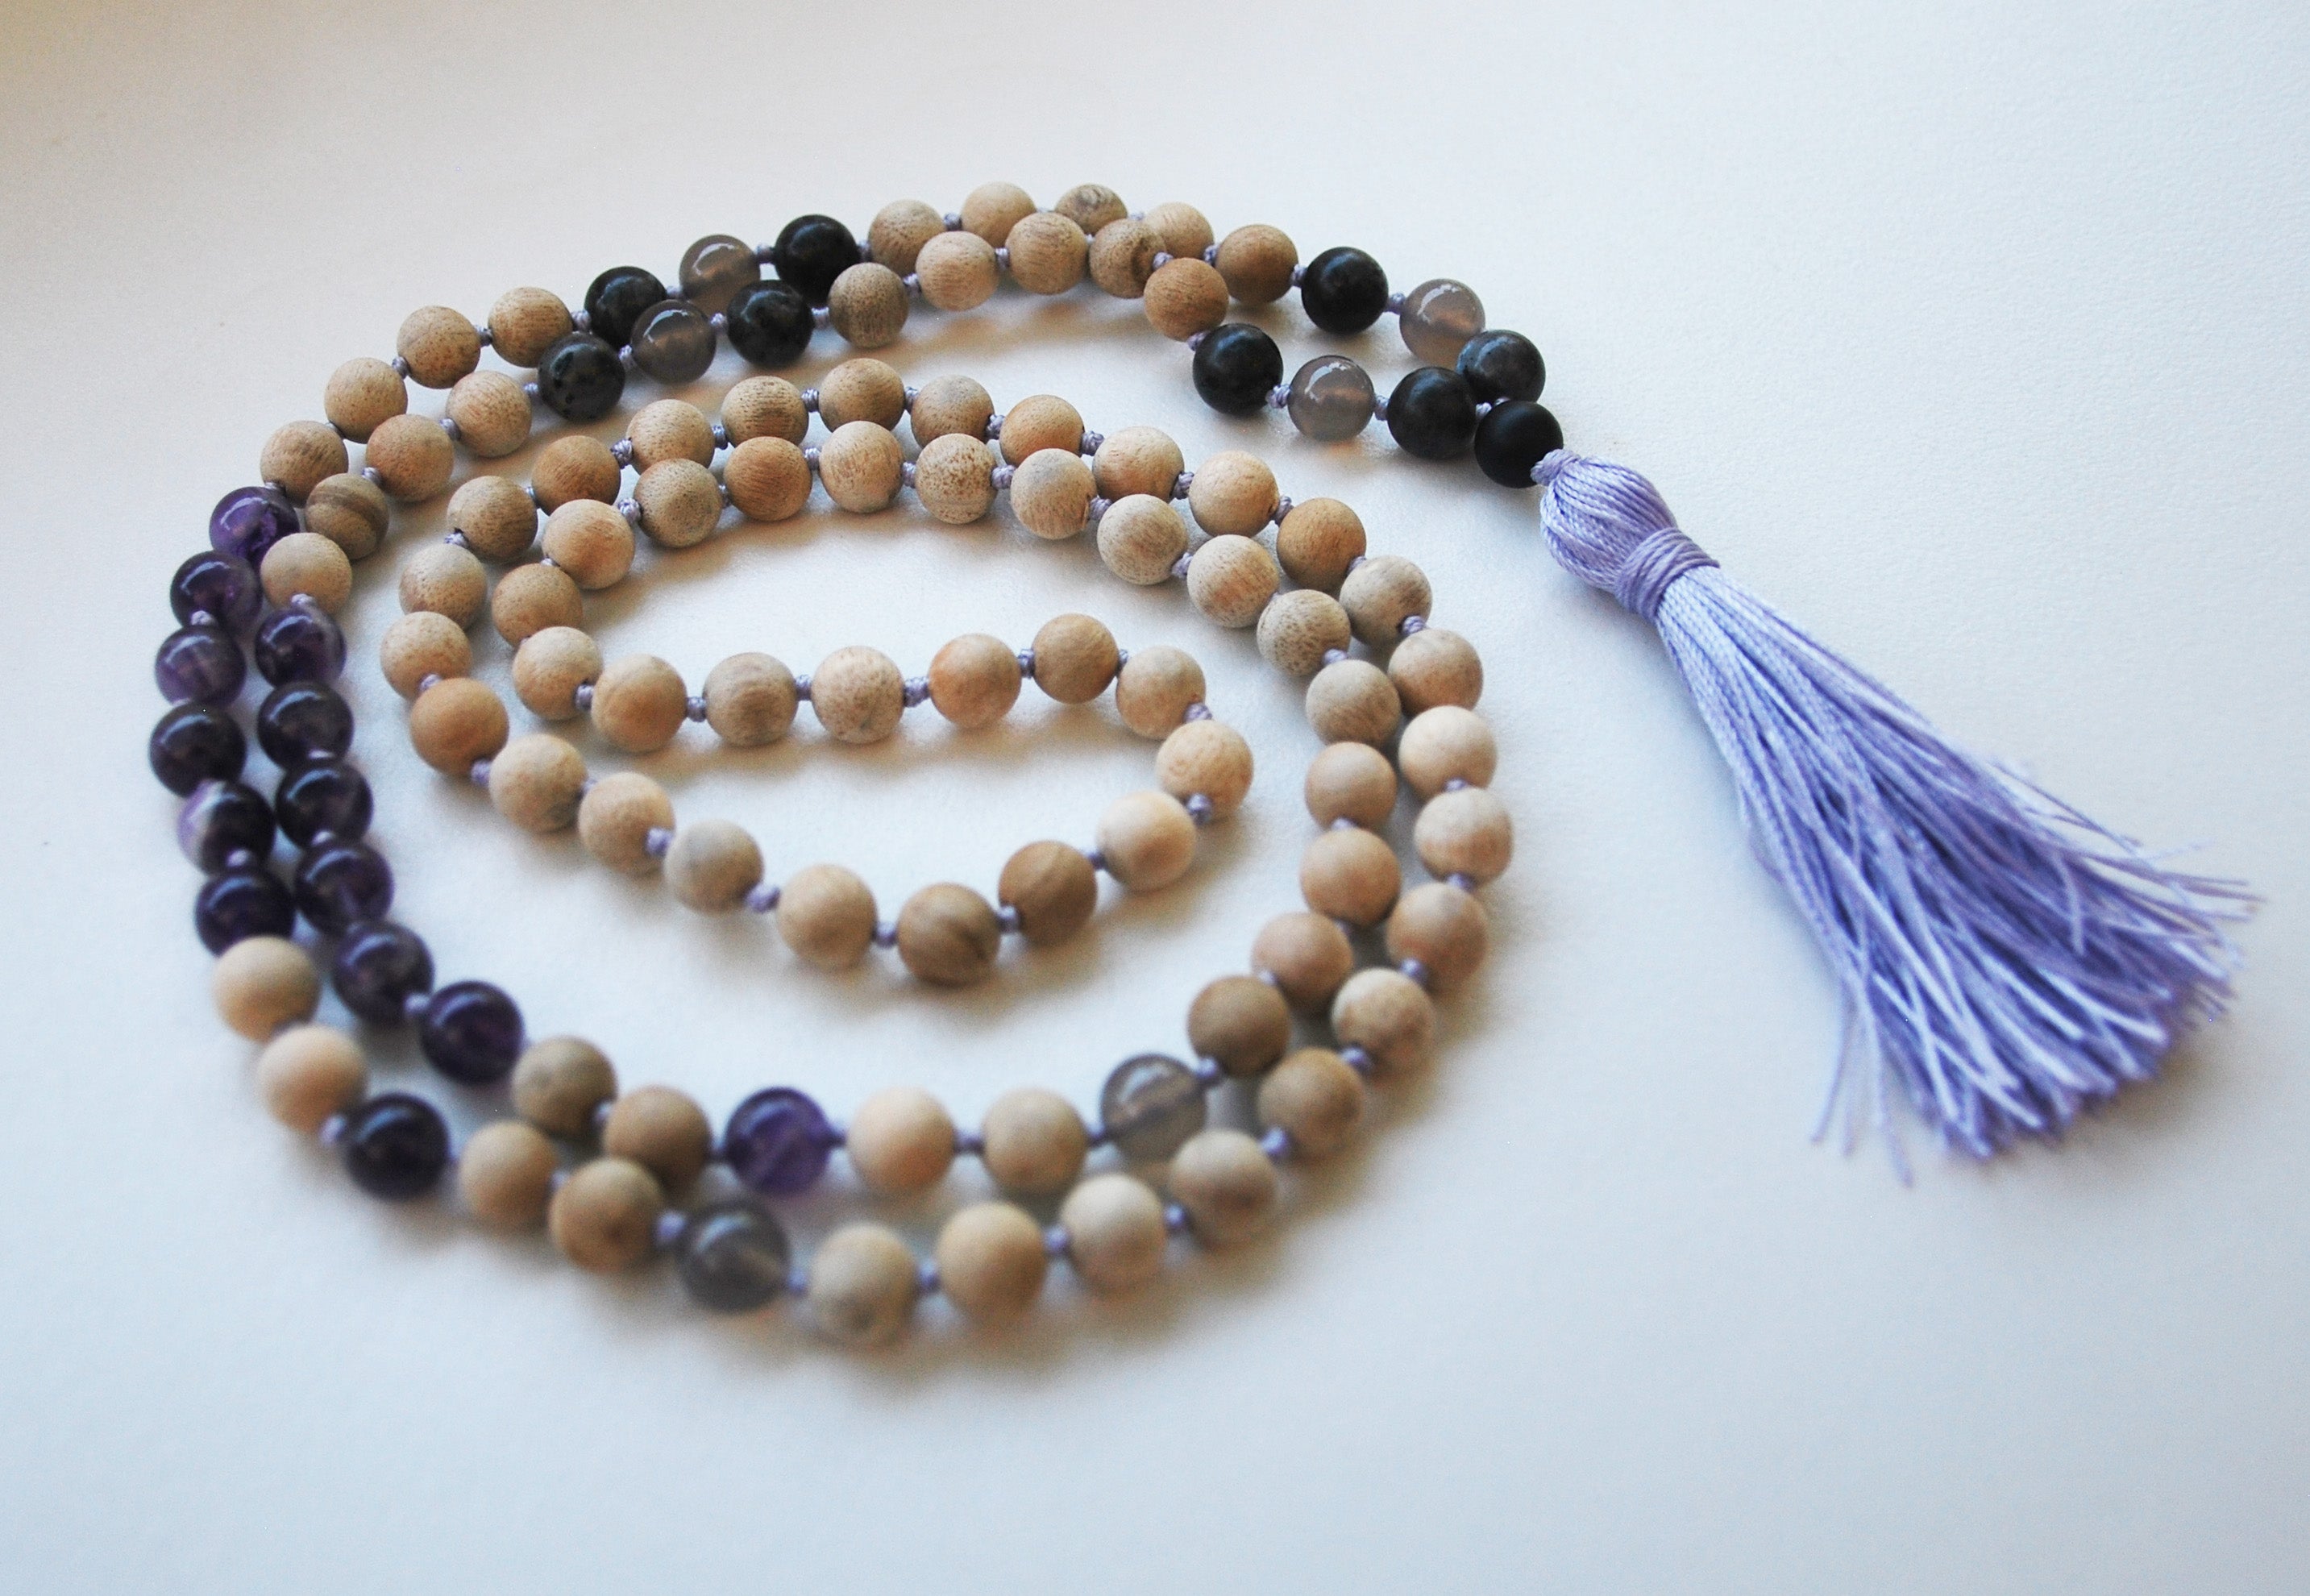 8mm Sandalwood & Amethyst 108 Knotted Mala Necklace with Colored Tassel